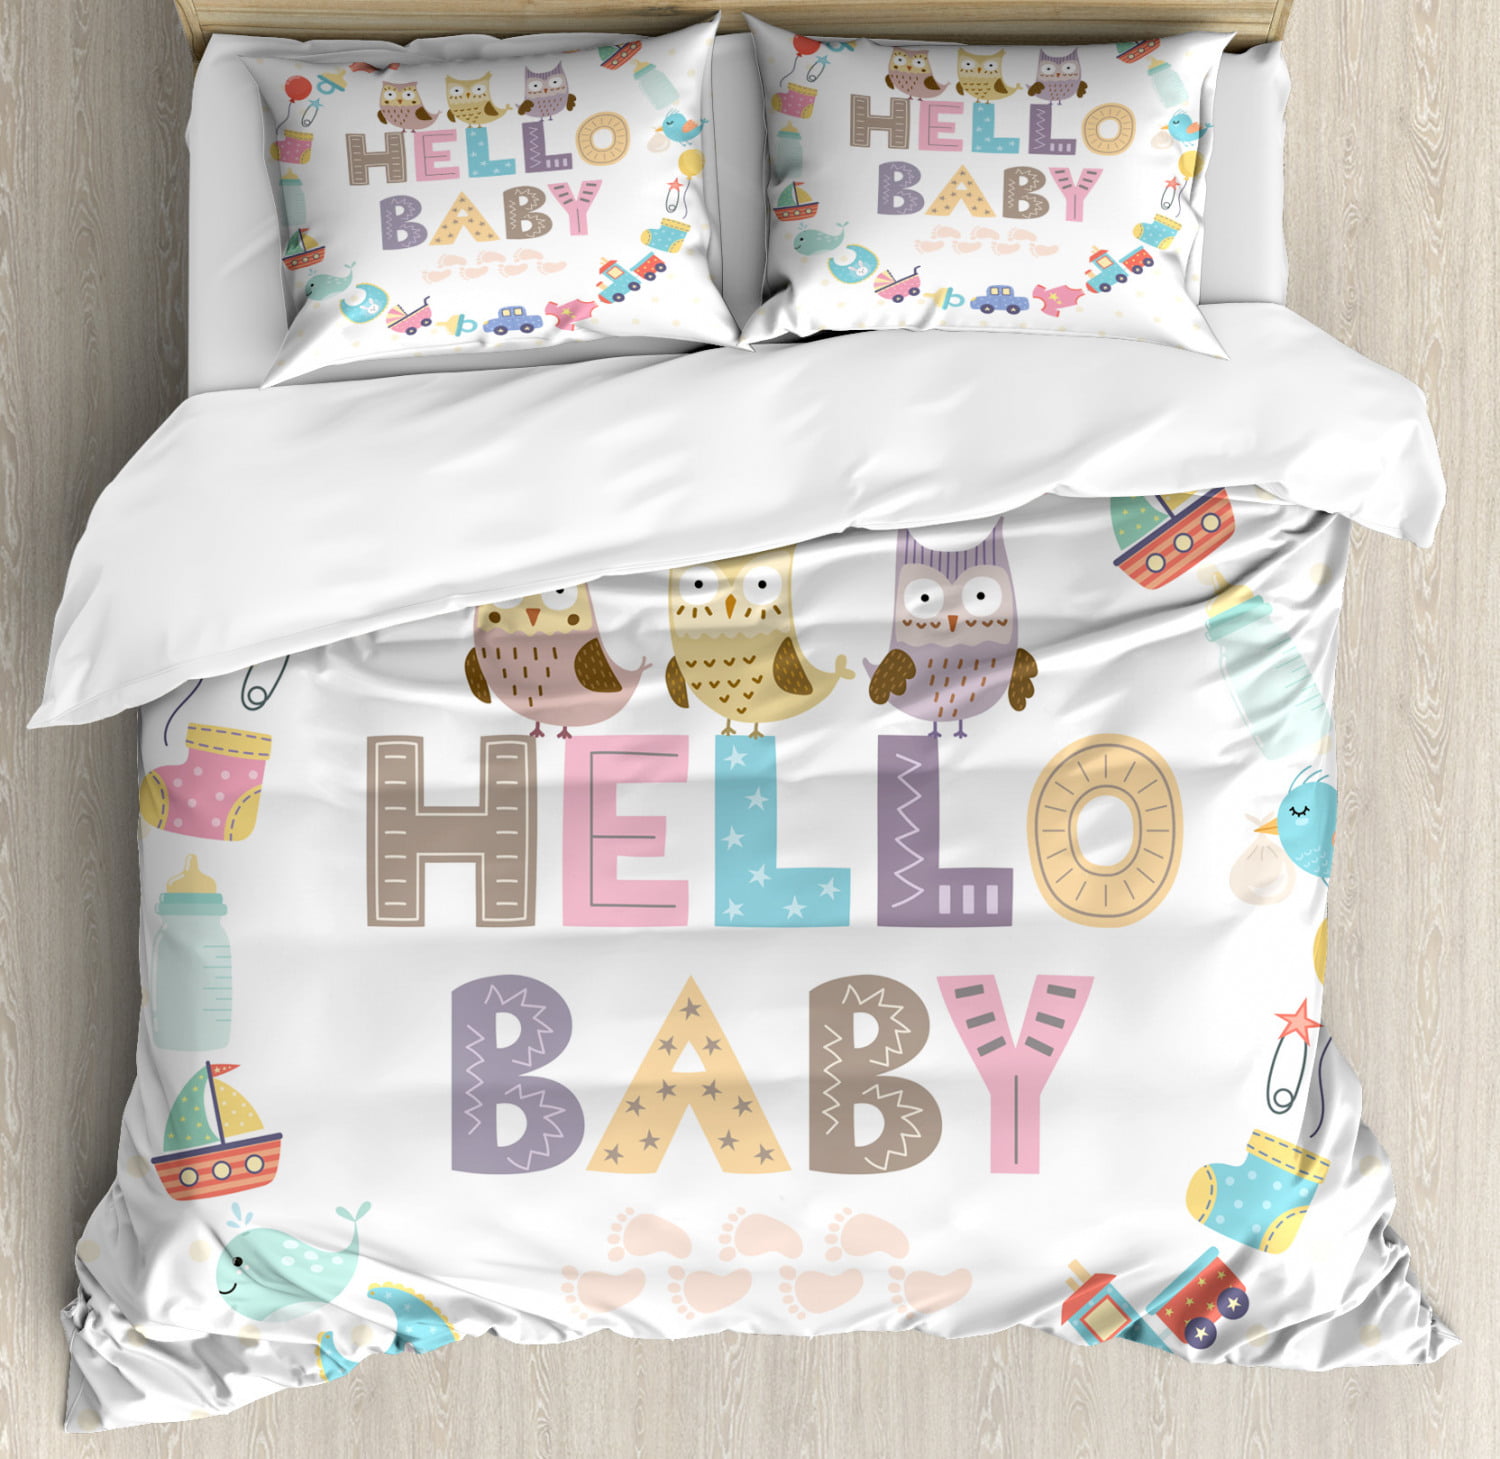 Baby Shower King Size Duvet Cover Set, Hello Baby Quote with Kids Elements  and Funny Owl Birds Welcome Newborn Party, Decorative 3 Piece Bedding Set  with 2 Pillow Shams, Multicolor, by Ambesonne -